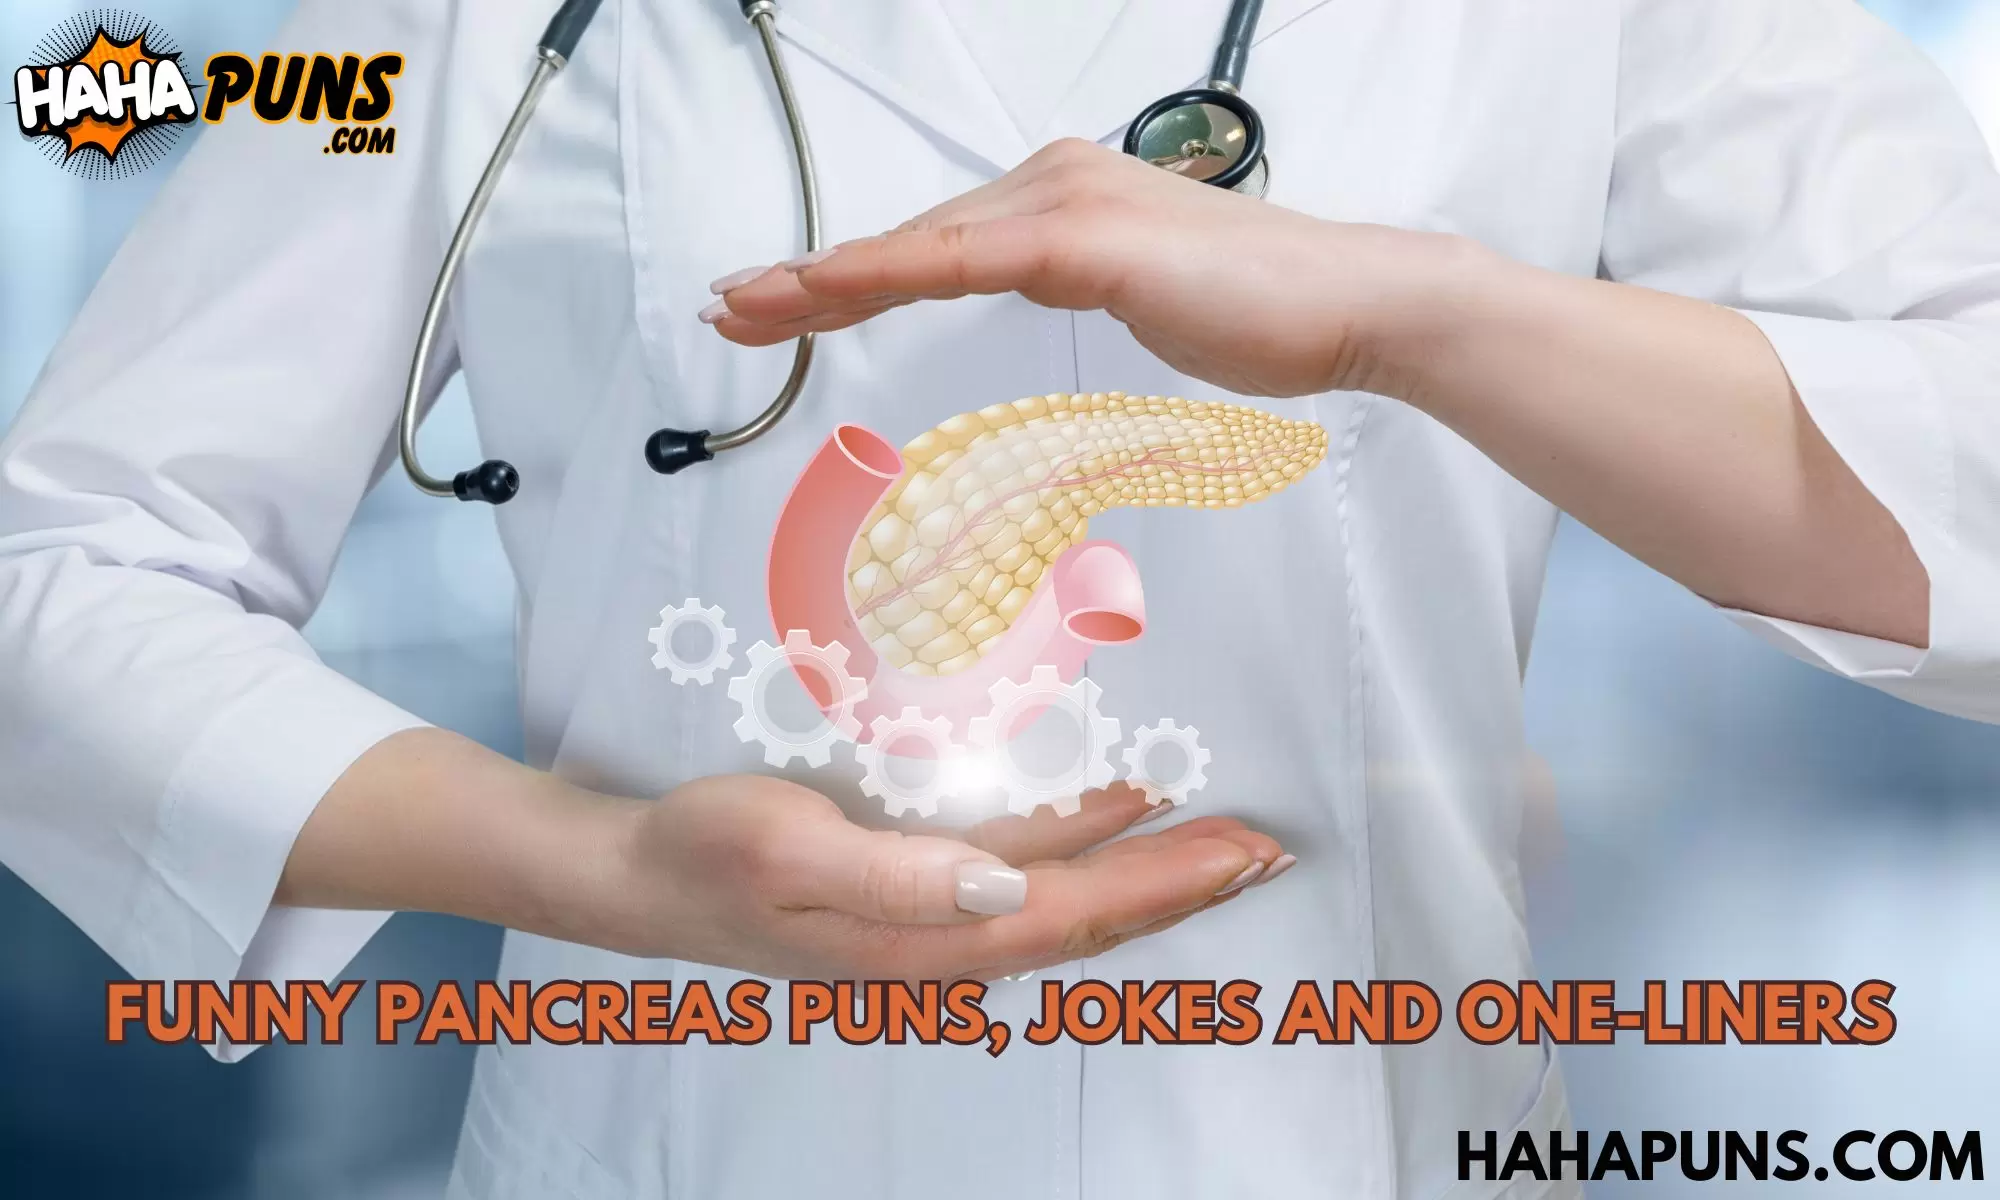 Funny Pancreas Puns, Jokes And One-Liners